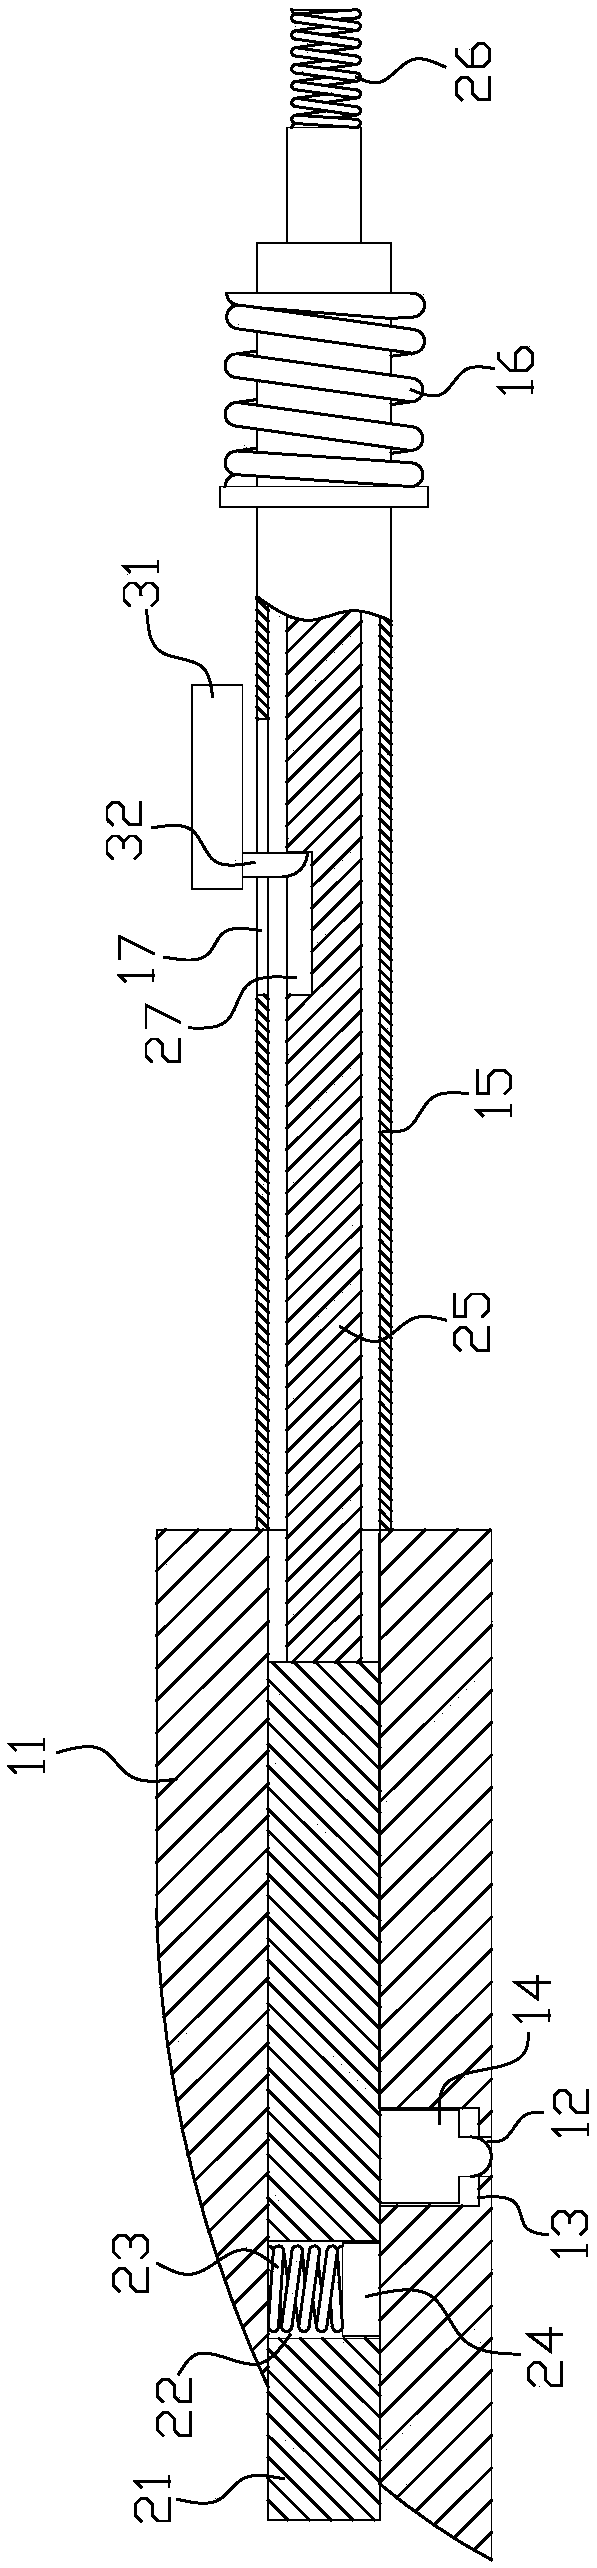 Anti-theft lock tongue and anti-theft door lock manufactured by utilizing same